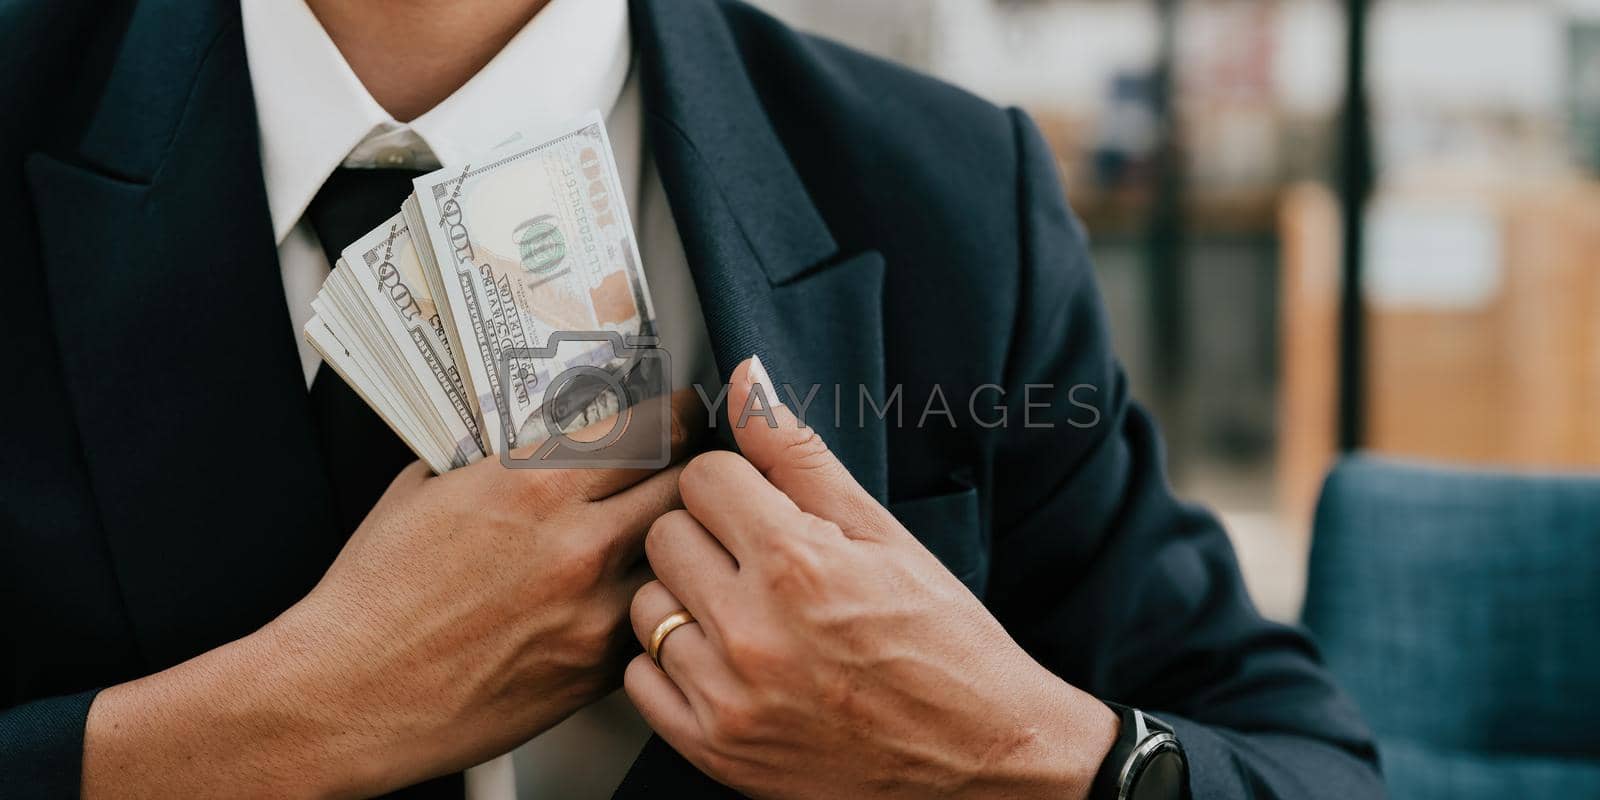 Royalty free image of Closeup conceptual photo of bribed man putting money in the suit pocket. banner concept. by nateemee